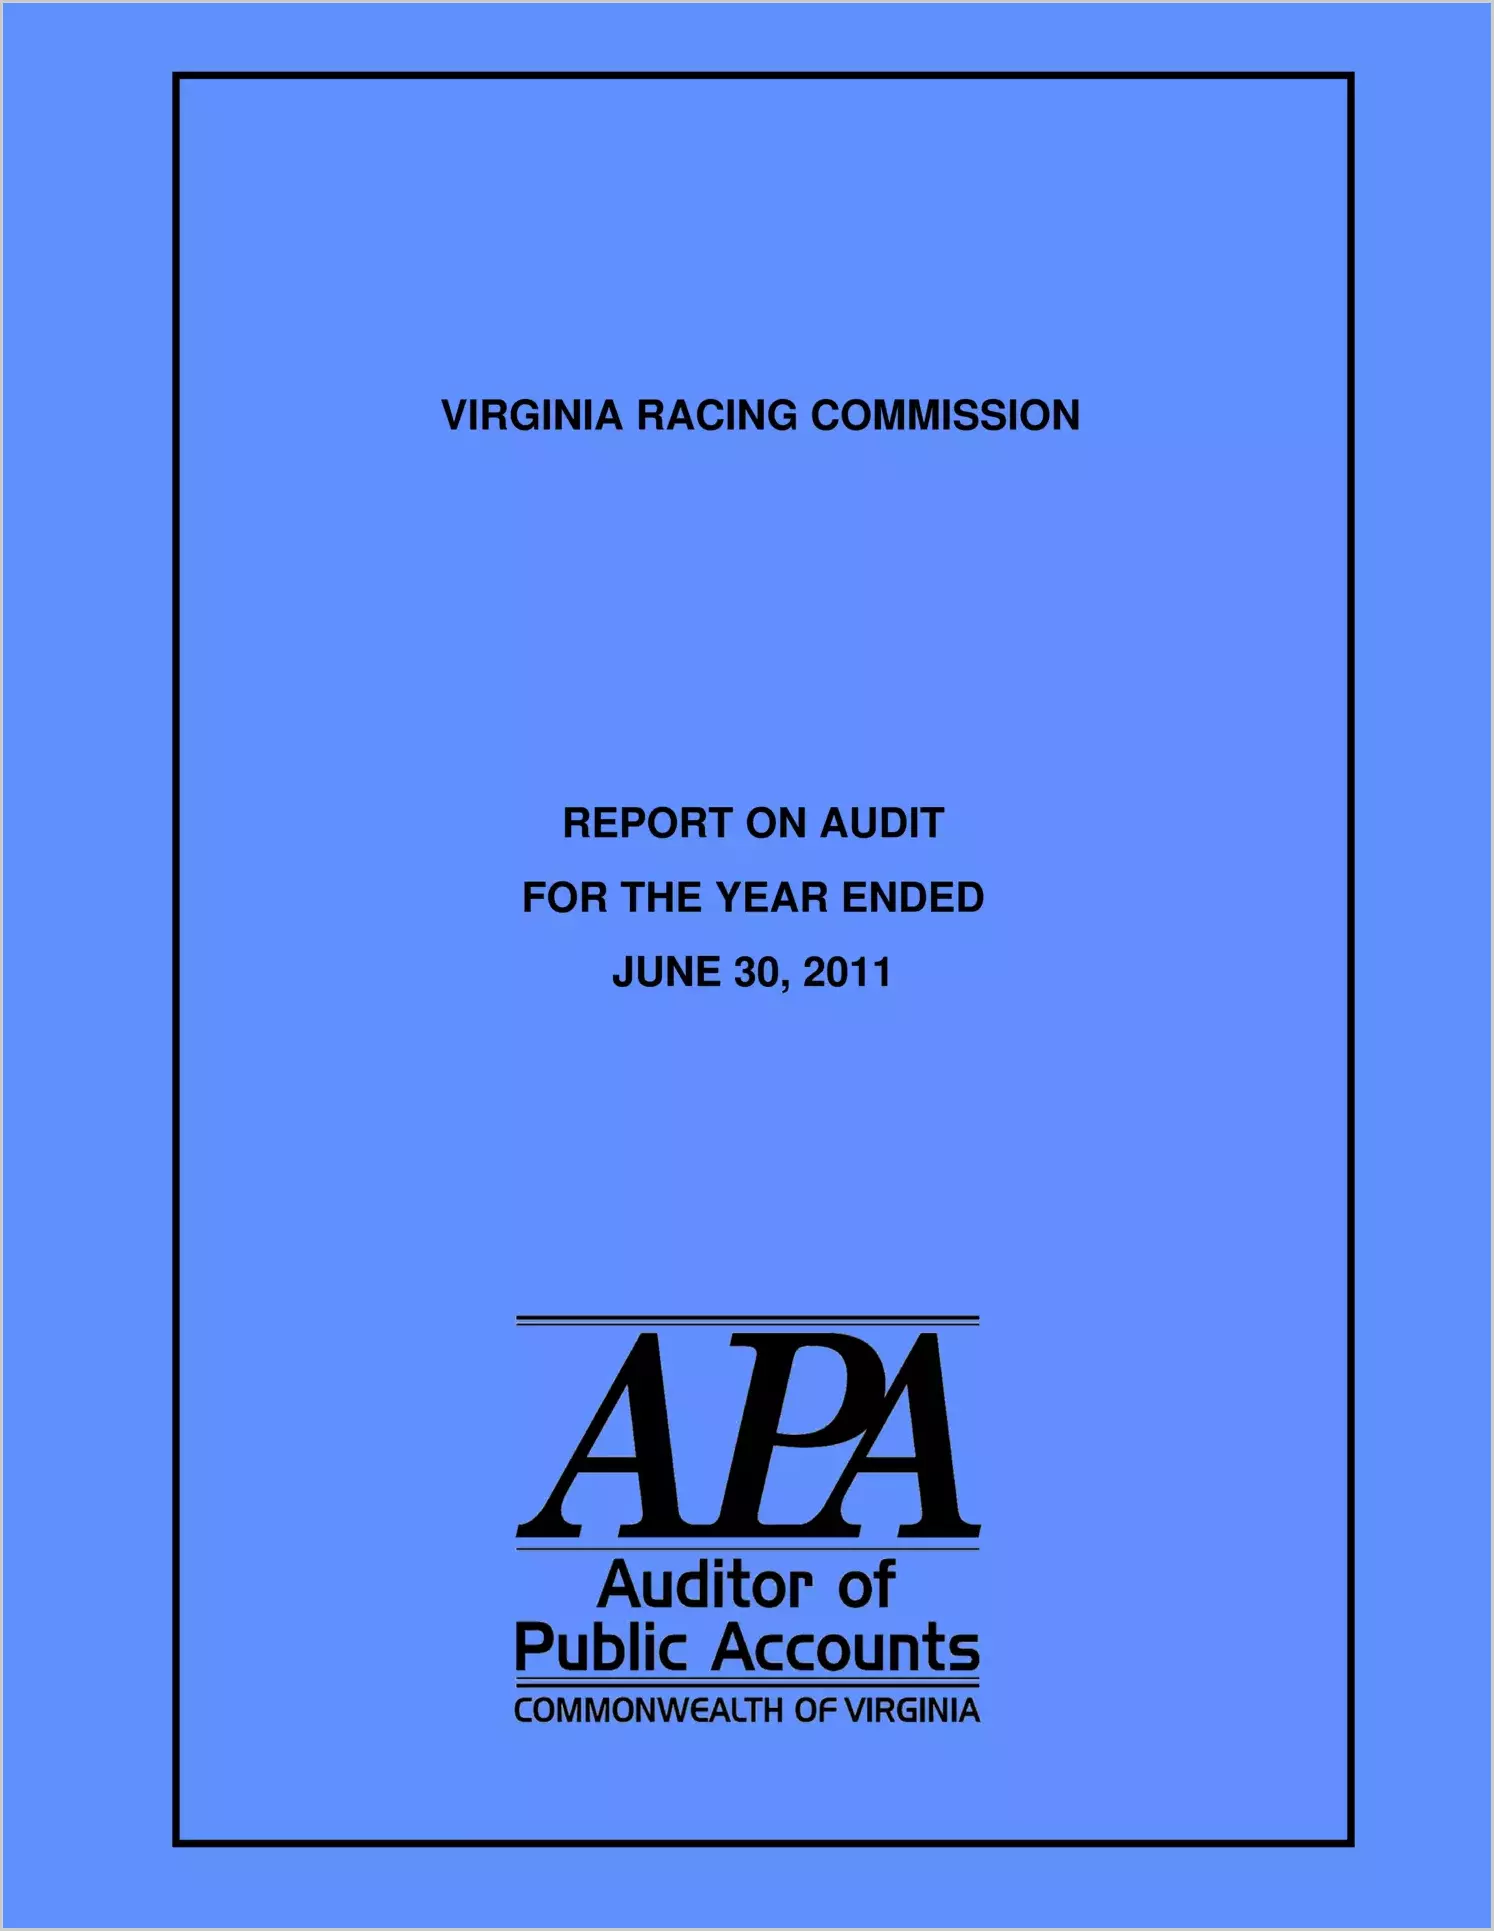 Virginia Racing Commission for the year ended June 30, 2011